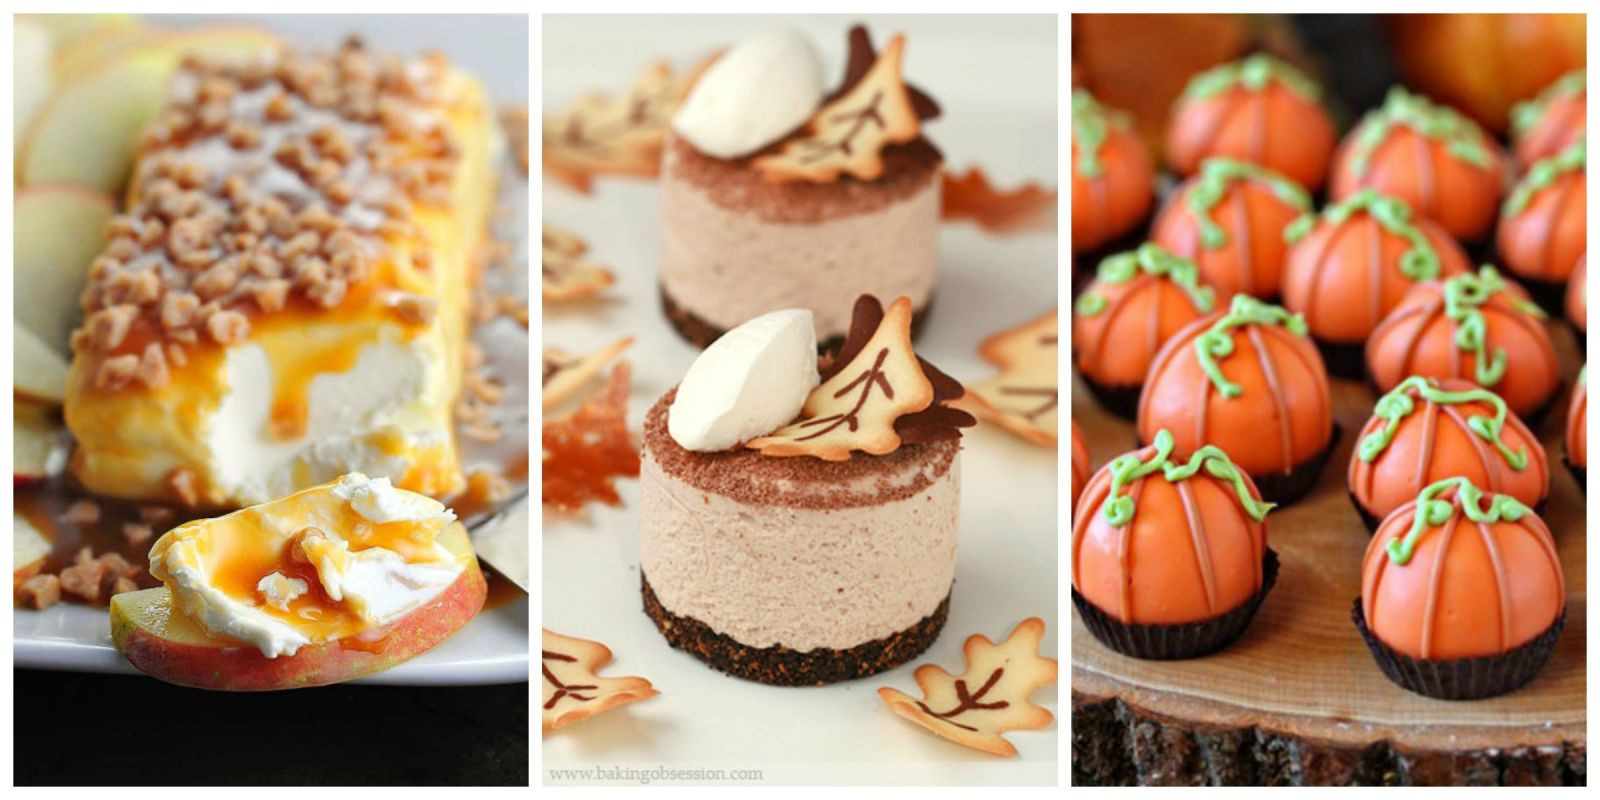 Simple Fall Desserts
 35 Easy Fall Dessert Recipes Best Treats for Autumn Parties